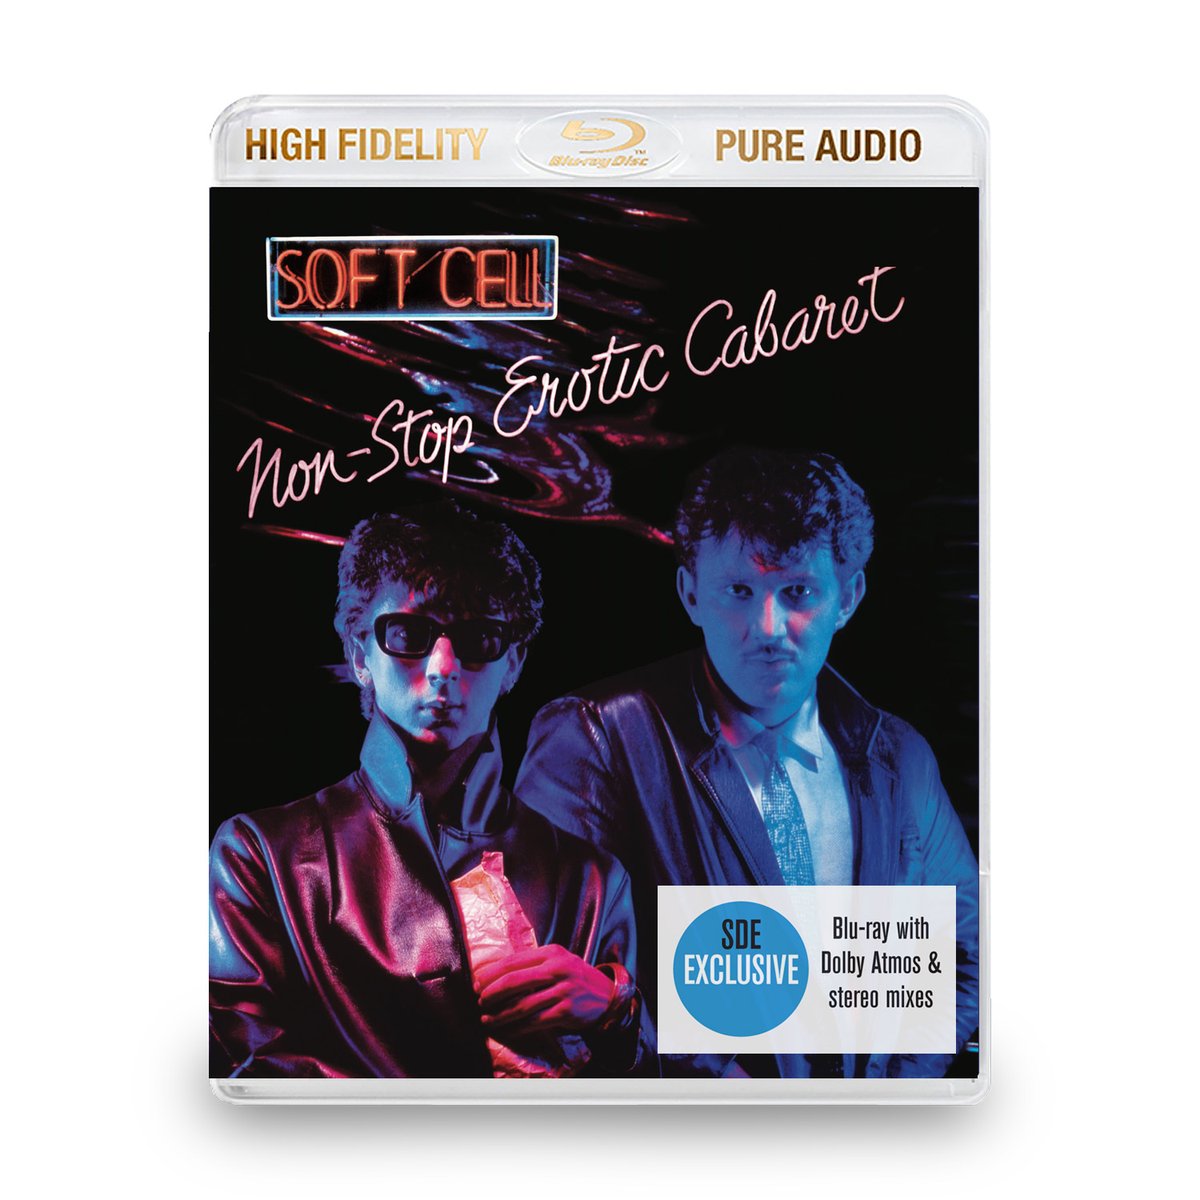 Exclusive! @softcellhq's incredible 1981 debut 'Non-Stop Erotic Cabaret' becomes 'Non-Stop Immersive Cabaret' for this SDE blu-ray with Dolby Atmos, Instrumental Atmos, bonus tracks and HD videos! Secure your copy now > bit.ly/3FpC5nH